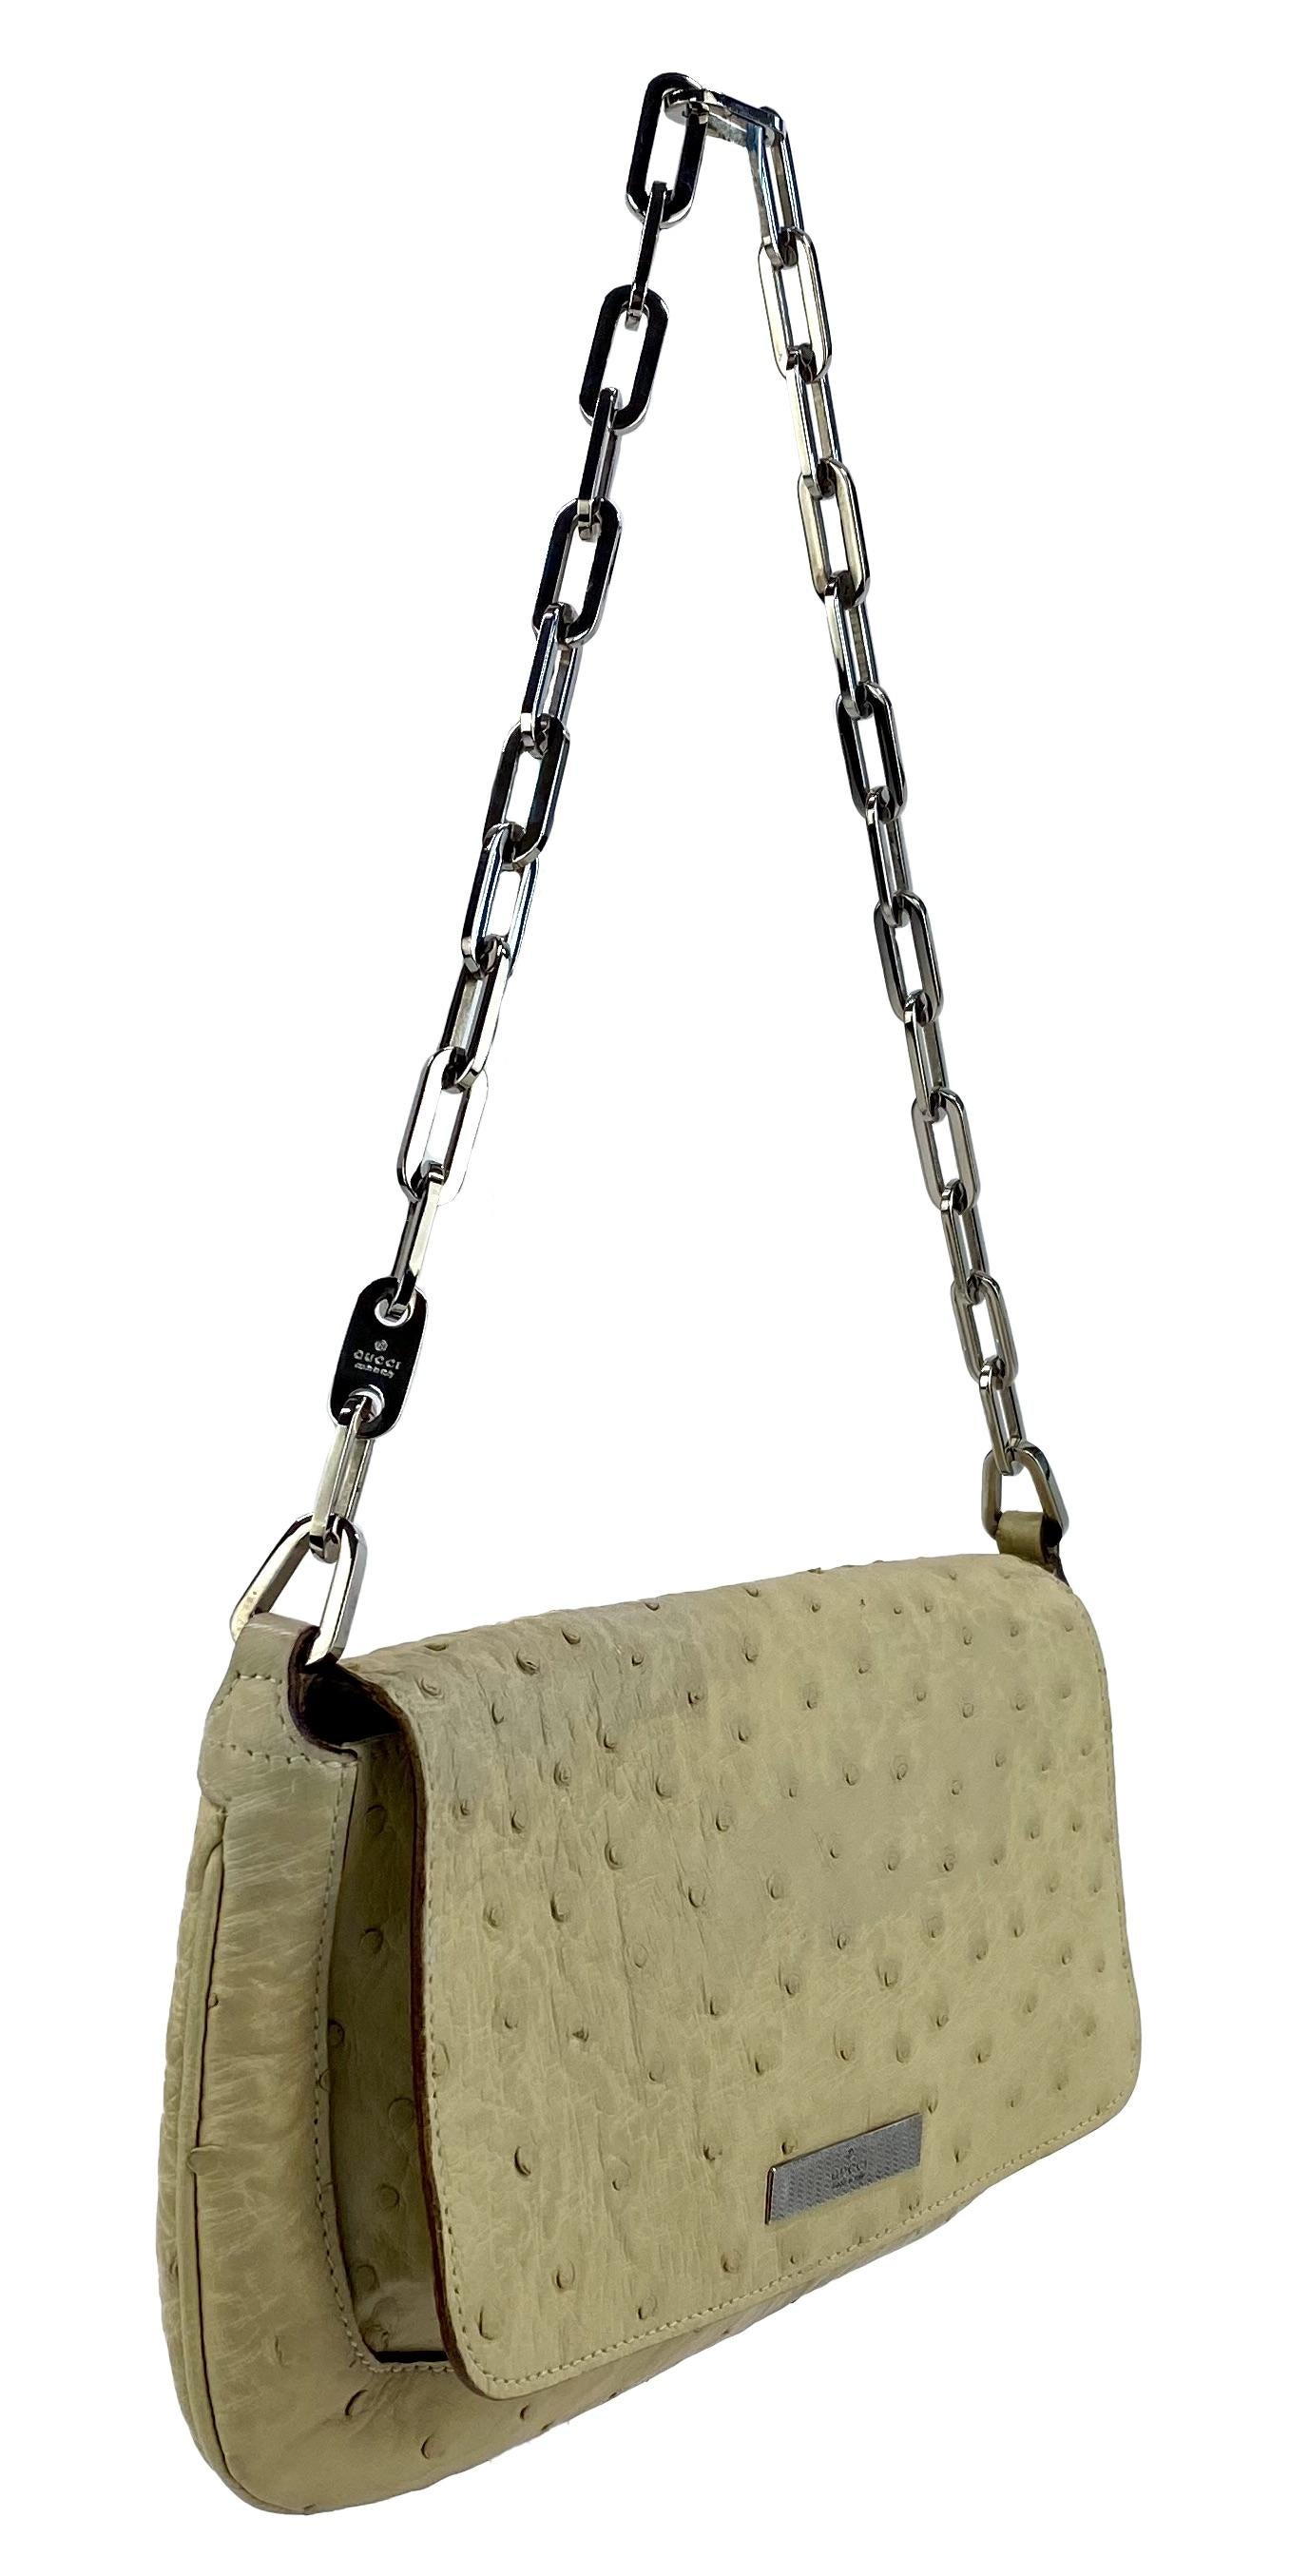 Presenting a gorgeous ostrich leather Gucci bag with a chainlink handle, designed by Tom Ford. This bag is from the Spring/Summer 2000 collection is constructed almost entirely of ostrich skin with a nylon interior. Many bags like this one were